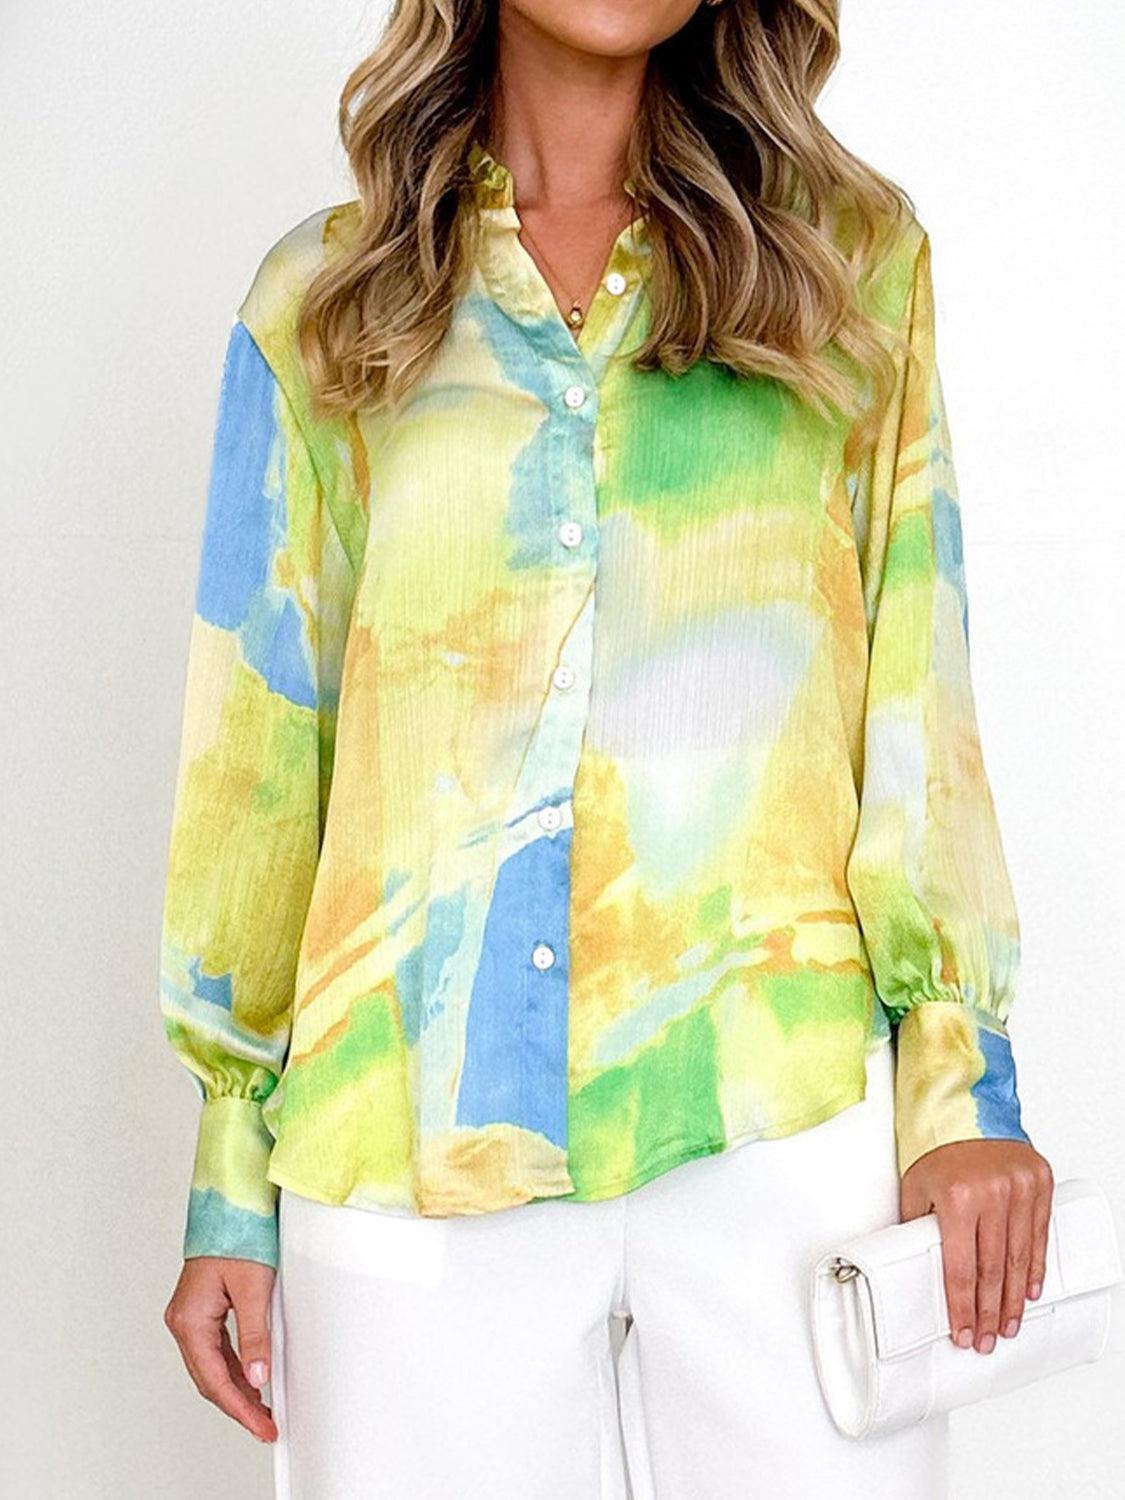 a woman is wearing a colorful shirt and white pants